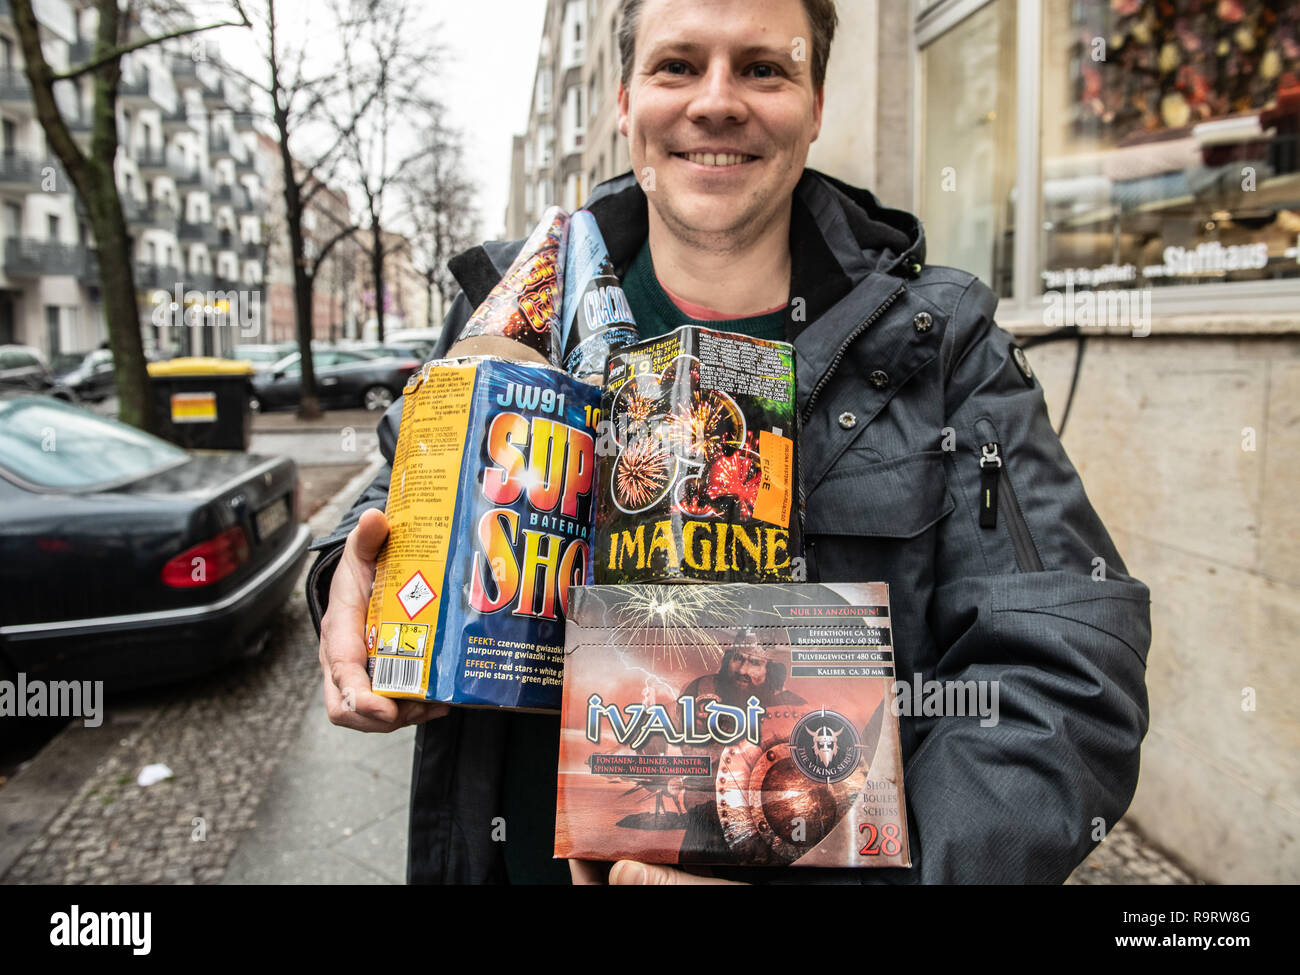 Berlin, Germany. 28th Dec, 2018. Marcus Rätzel from Berlin shows a part of the New Year's Eve pyrotechnics he bought in a shop in Friedrichshain. Together with his family he will shoot the rockets and batteries into the sky on New Year's Eve. Credit: Paul Zinken/dpa/Alamy Live News Stock Photo